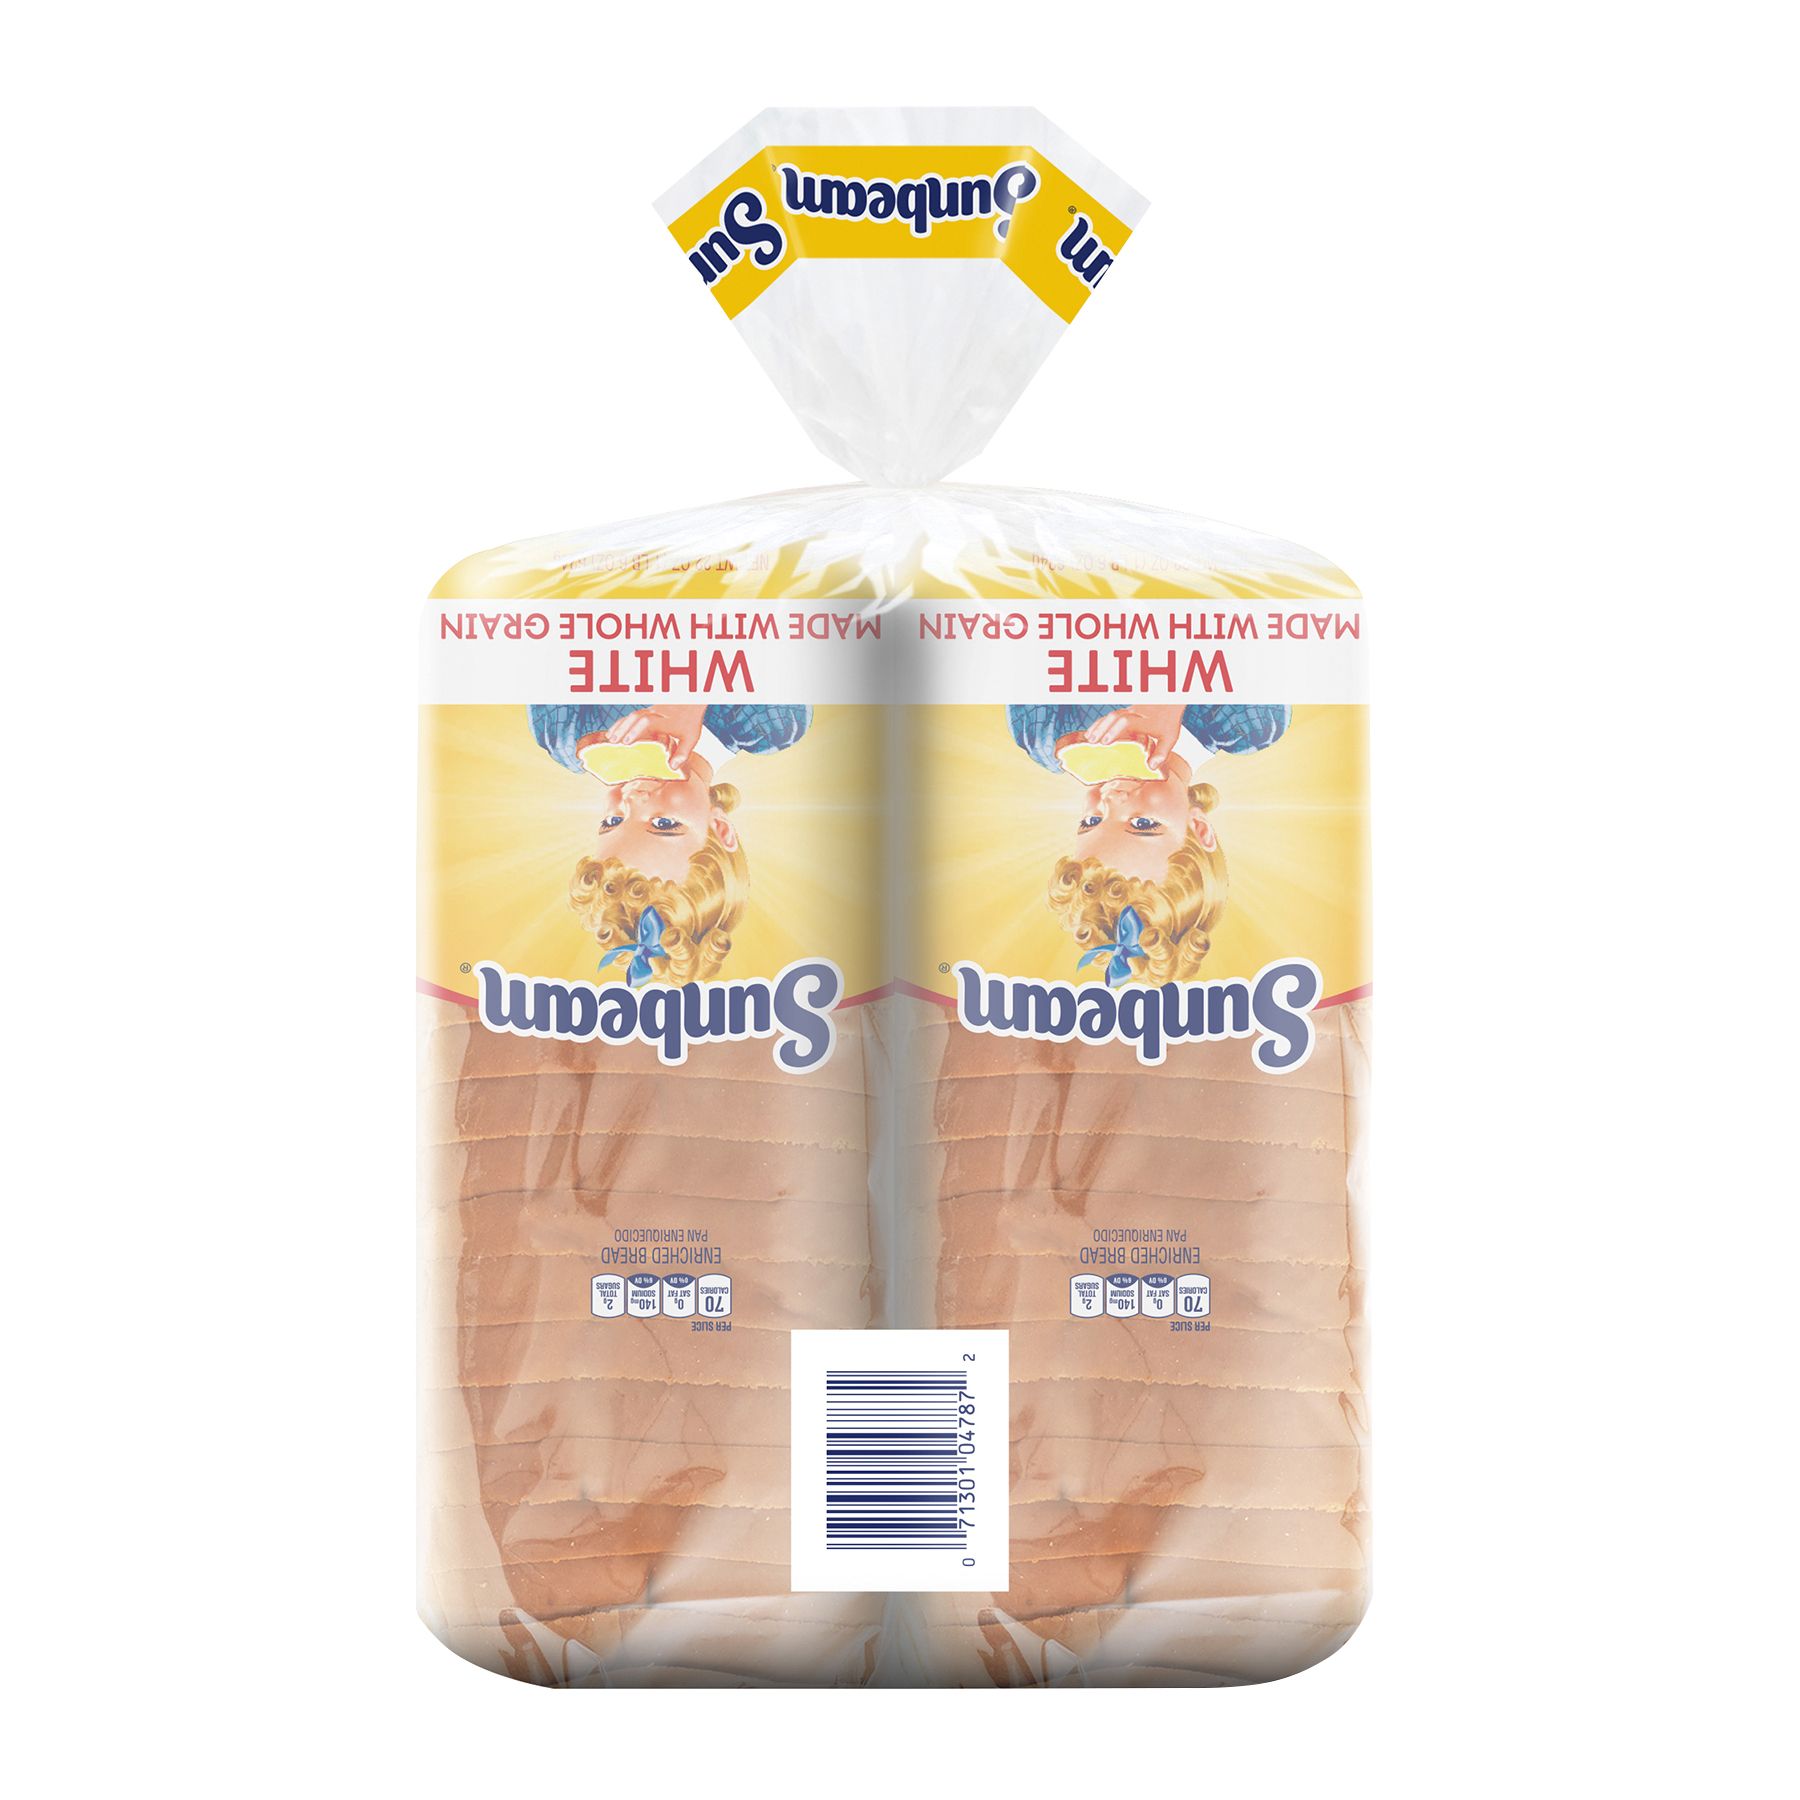 Sunbeam White Bread with Whole Grain Twin Pack, 44 oz.